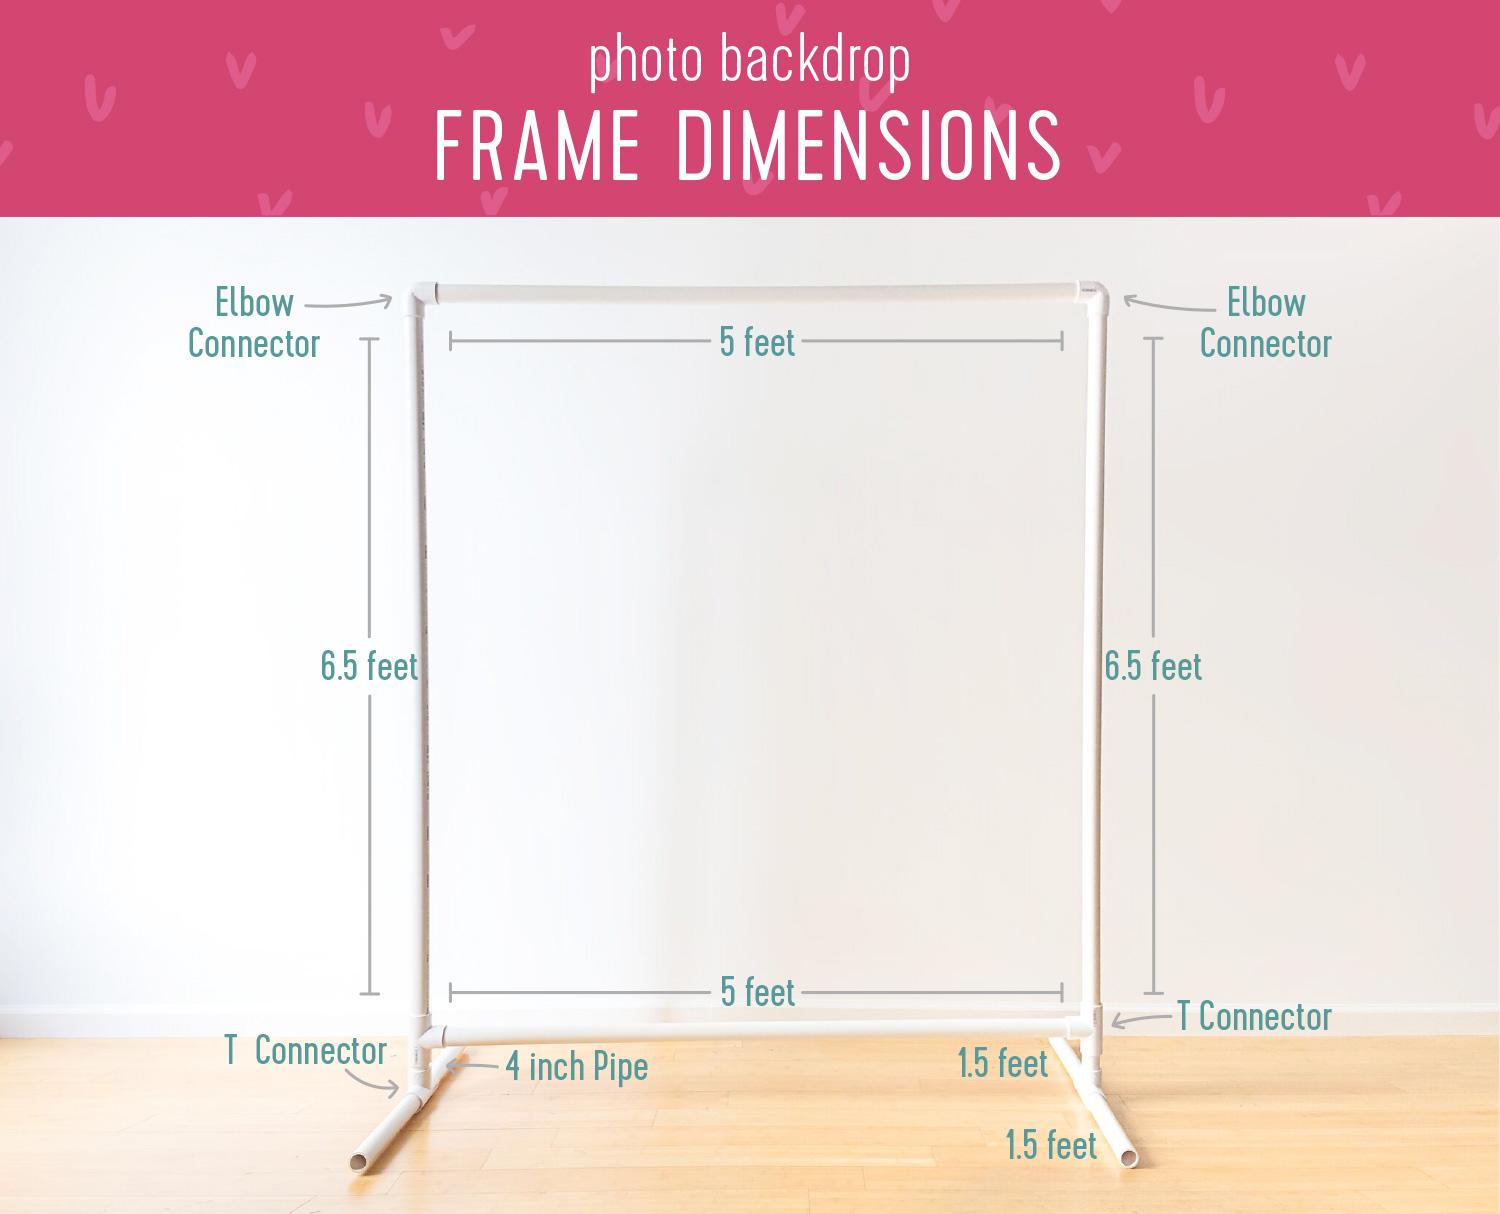 how to make a photo booth backdrop stand